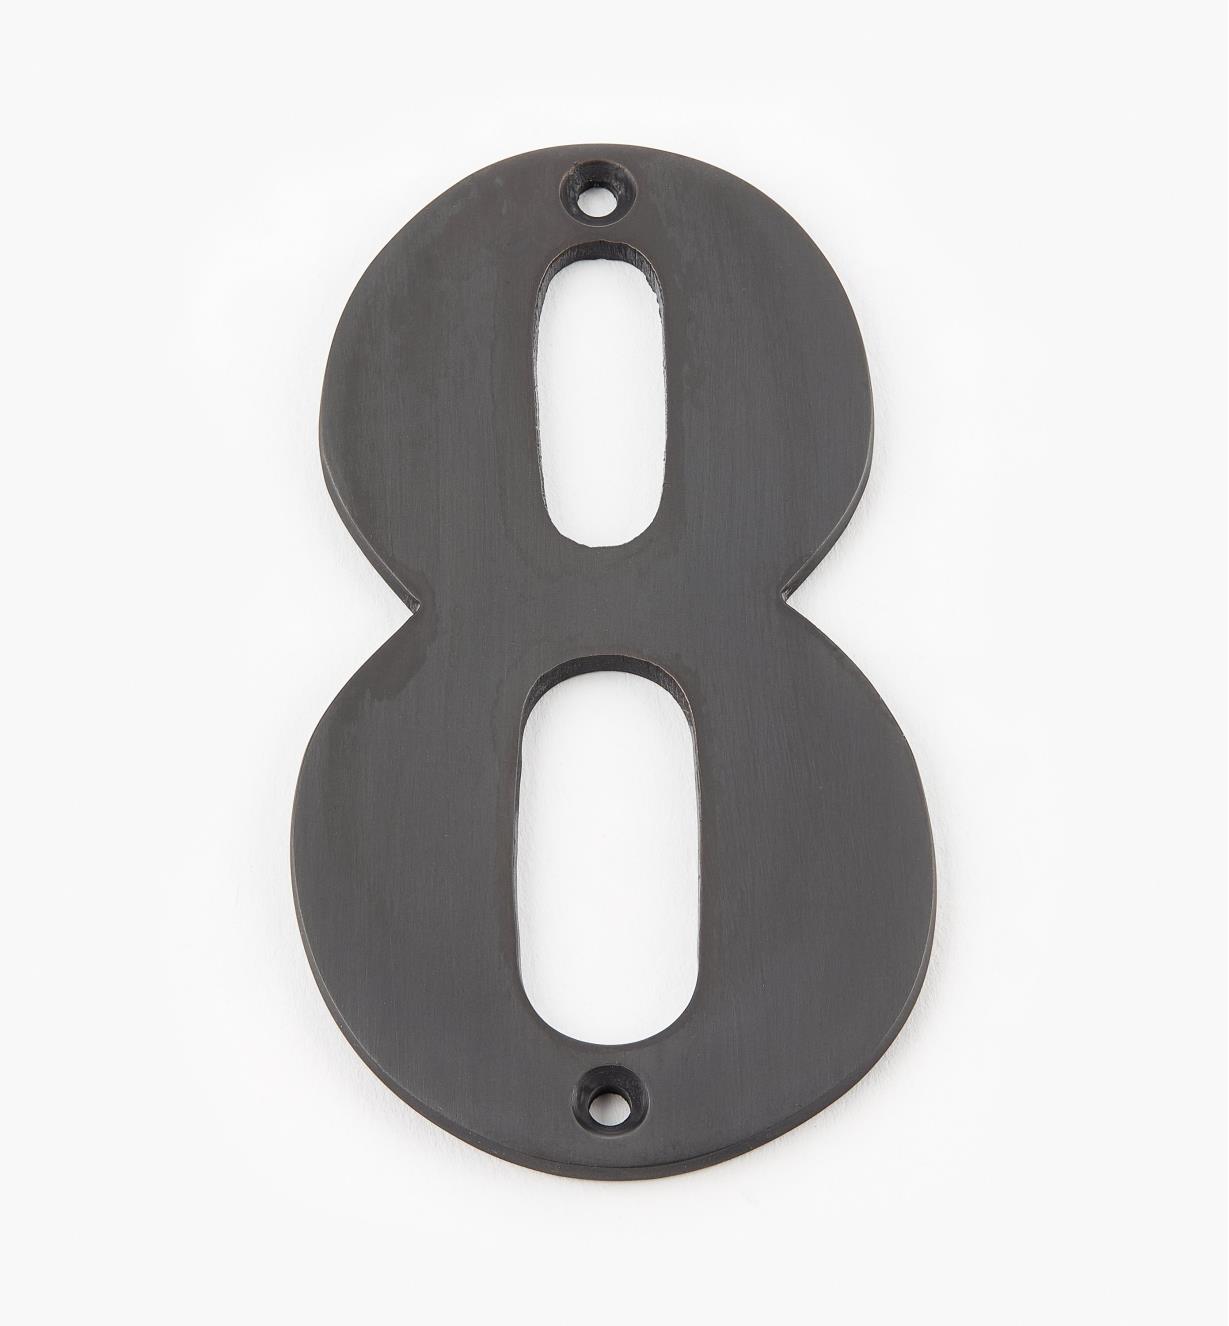 00W0578 - 4" Standard Oil-Rubbed Bronze Number - 8